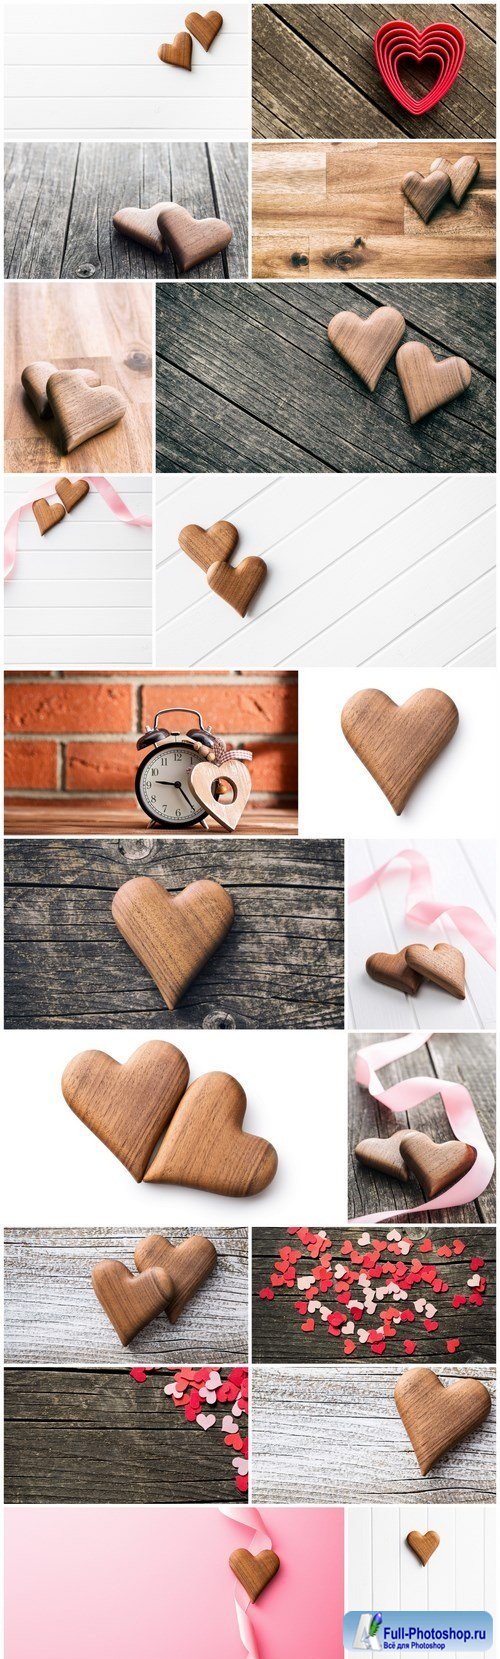 Wooden Heart & Love - Happy Valentines Day - Set of 20xUHQ JPEG Professional Stock Images